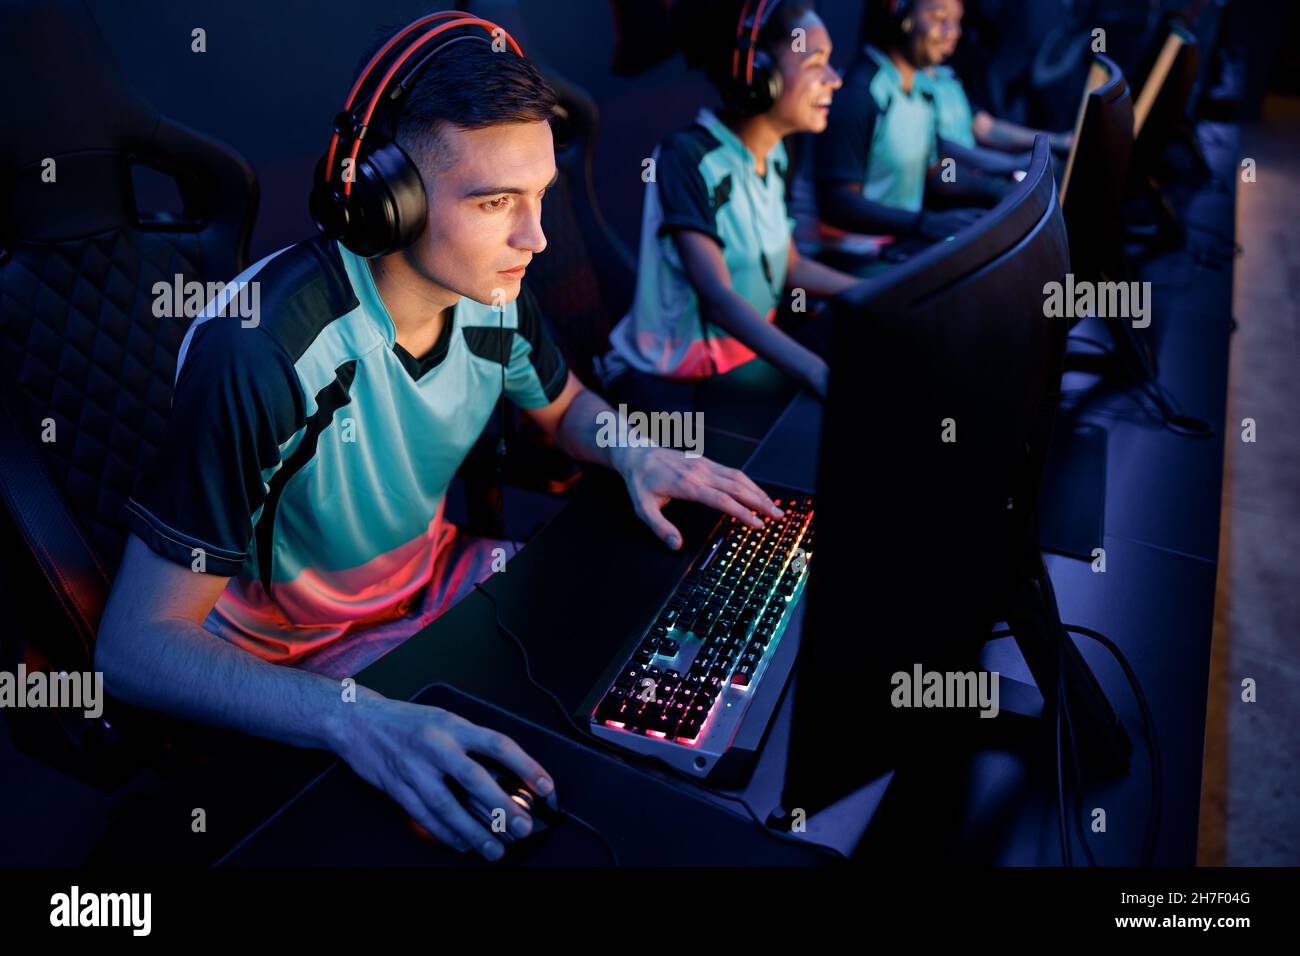 Determined man gaming with his friends in cyber club Stock Photo